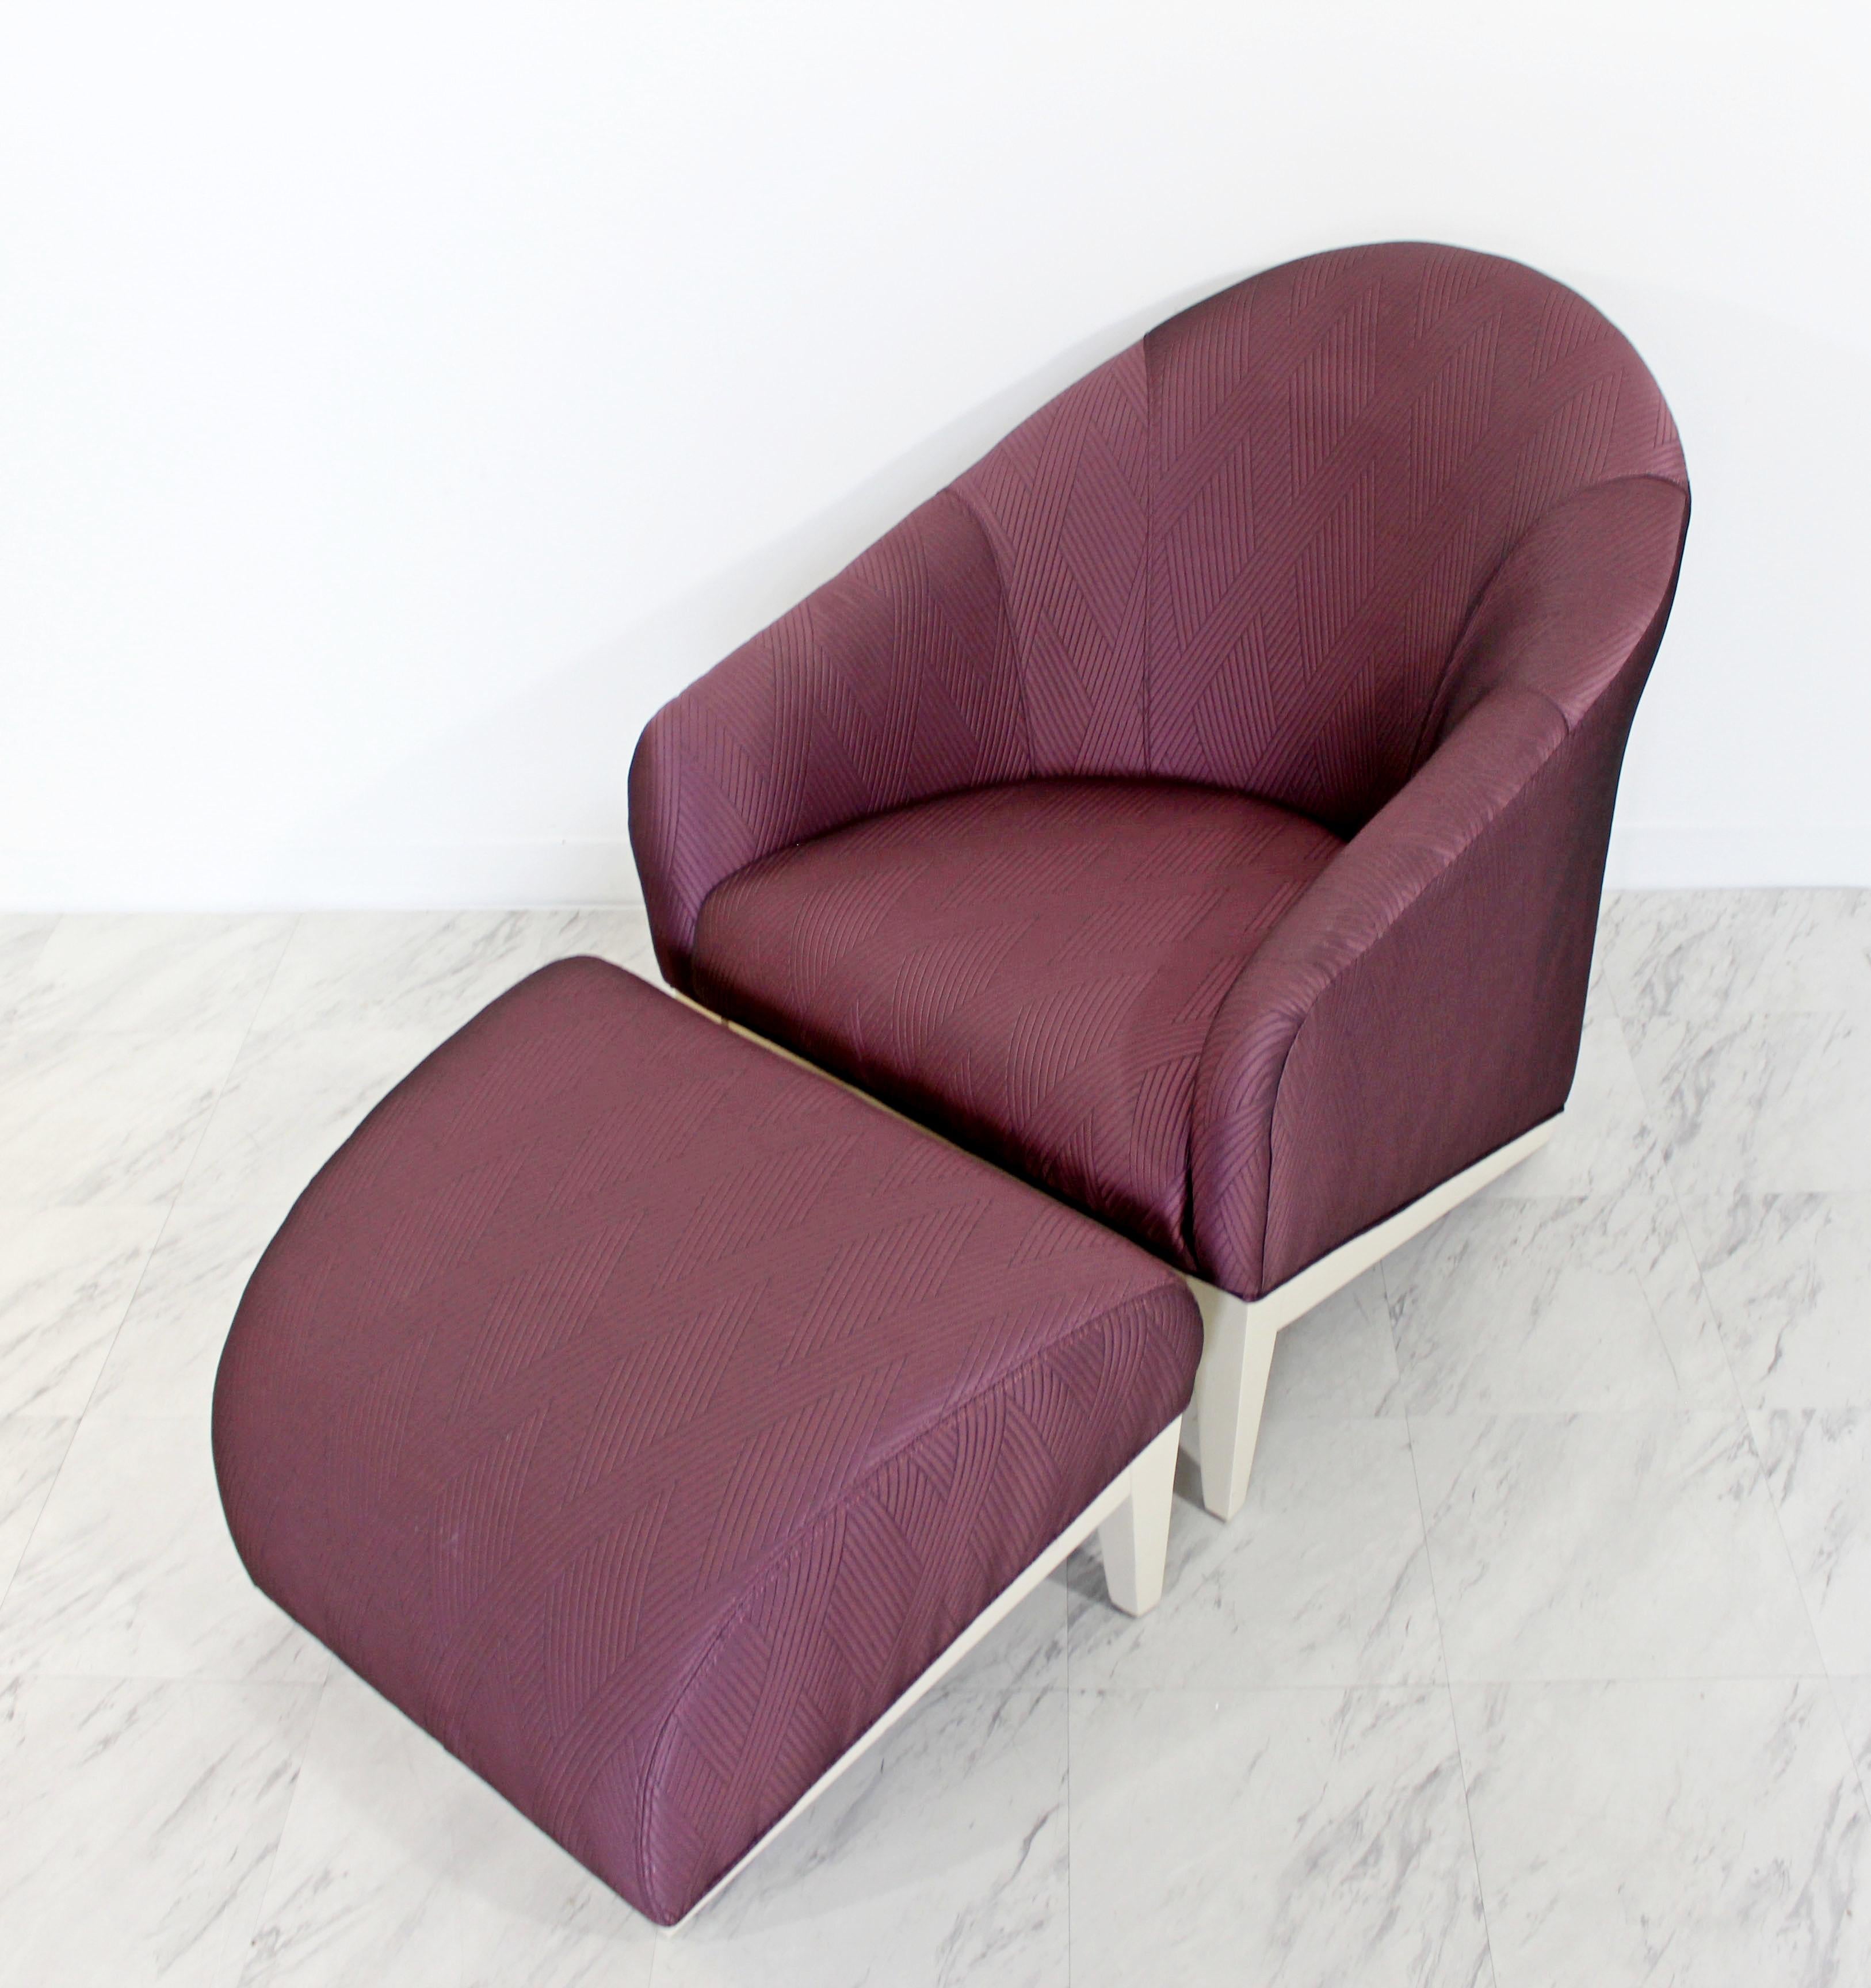 For your consideration is a unique, lounge armchair and matching ottoman. Upholstery is a beautiful purple raw silk. In excellent condition. The dimensions of the chair are 27